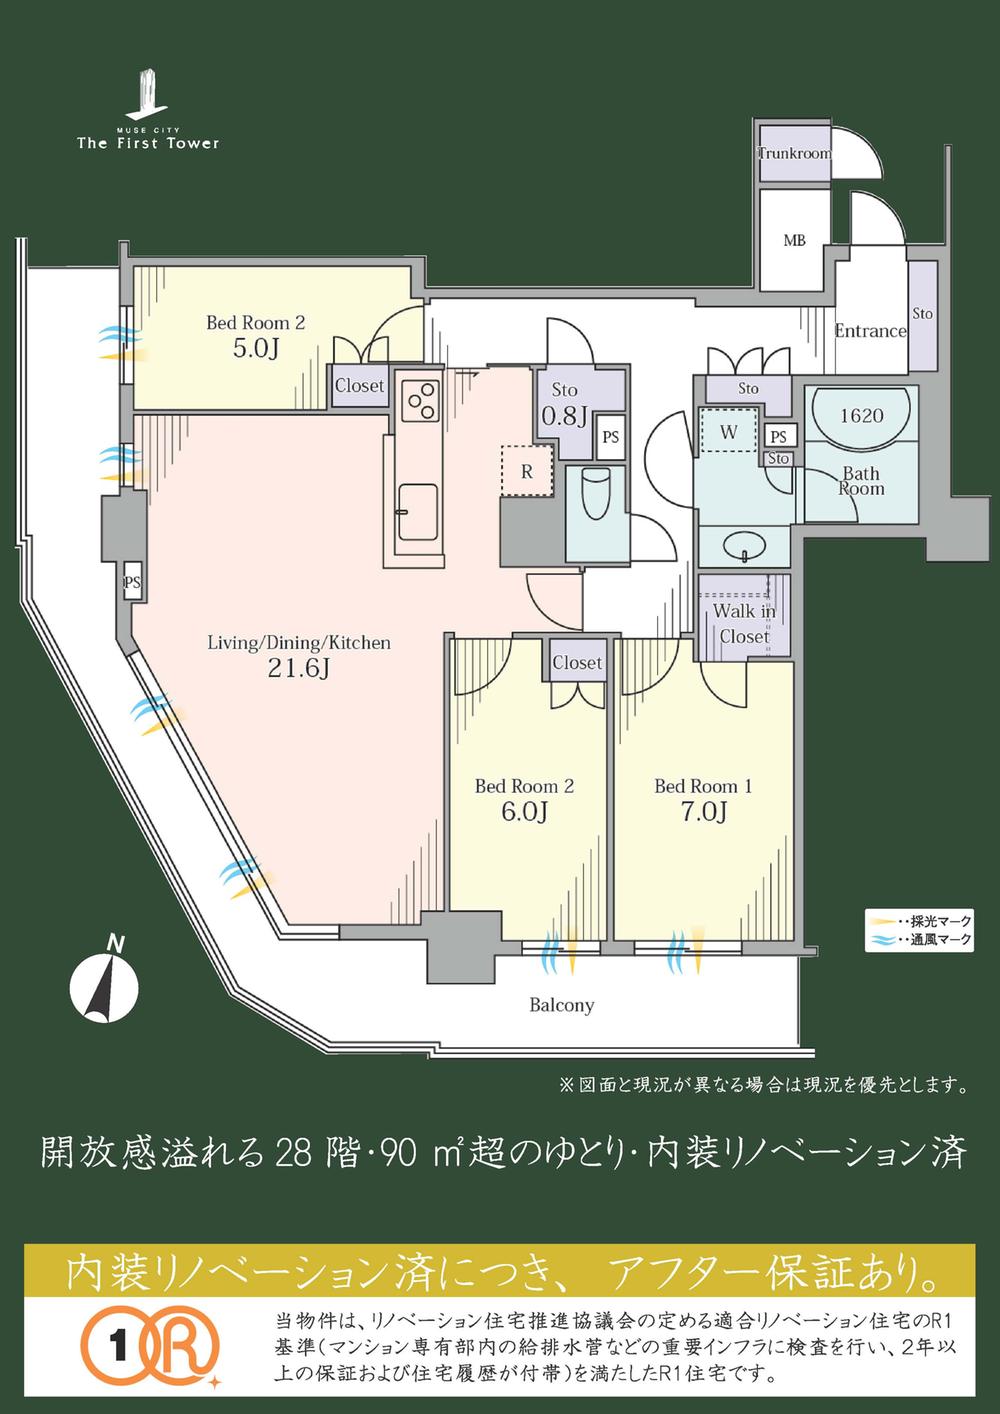 Floor plan. 3LDK, Price 62,800,000 yen, Occupied area 93.26 sq m , In addition to the breadth of a balcony area 20.51 sq m room, Since the outside the dwelling unit, which also provided the trunk room to come in handy to put away the things you do not want to put in a room, The rooms are more spacious and cleaner use that feature. Attractive design that takes into account the ease of use that can be migratory water around.